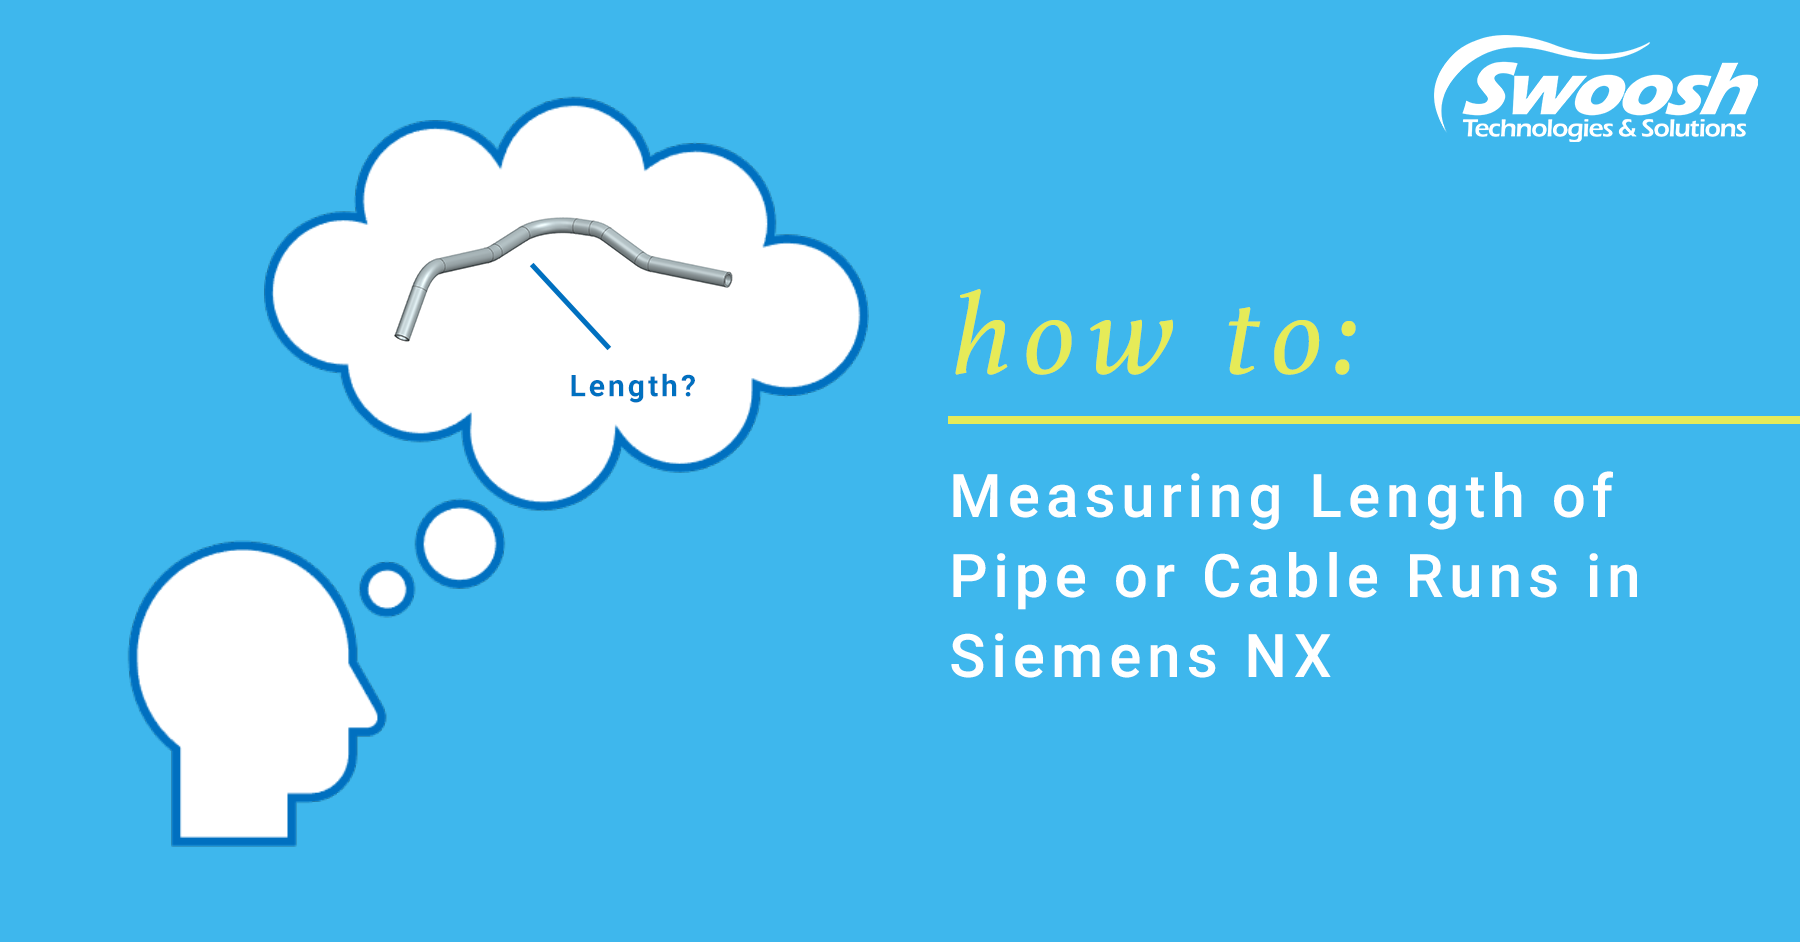 How to: Measure Length of Pipe or Cable Runs in Siemens NX